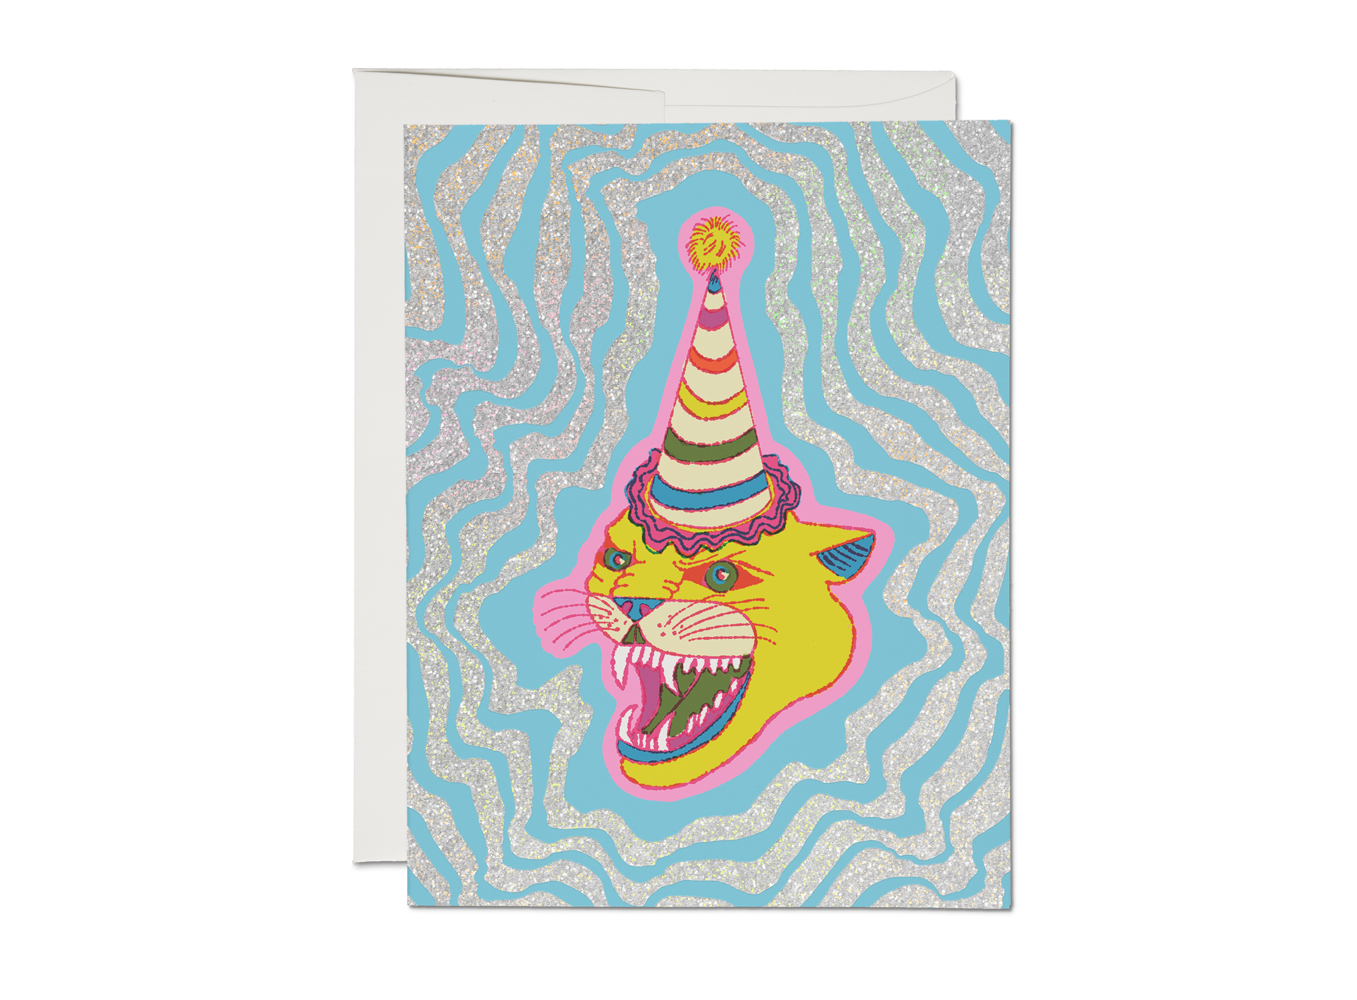 Party Hat Cat birthday greeting card - The Crowd Went Wild